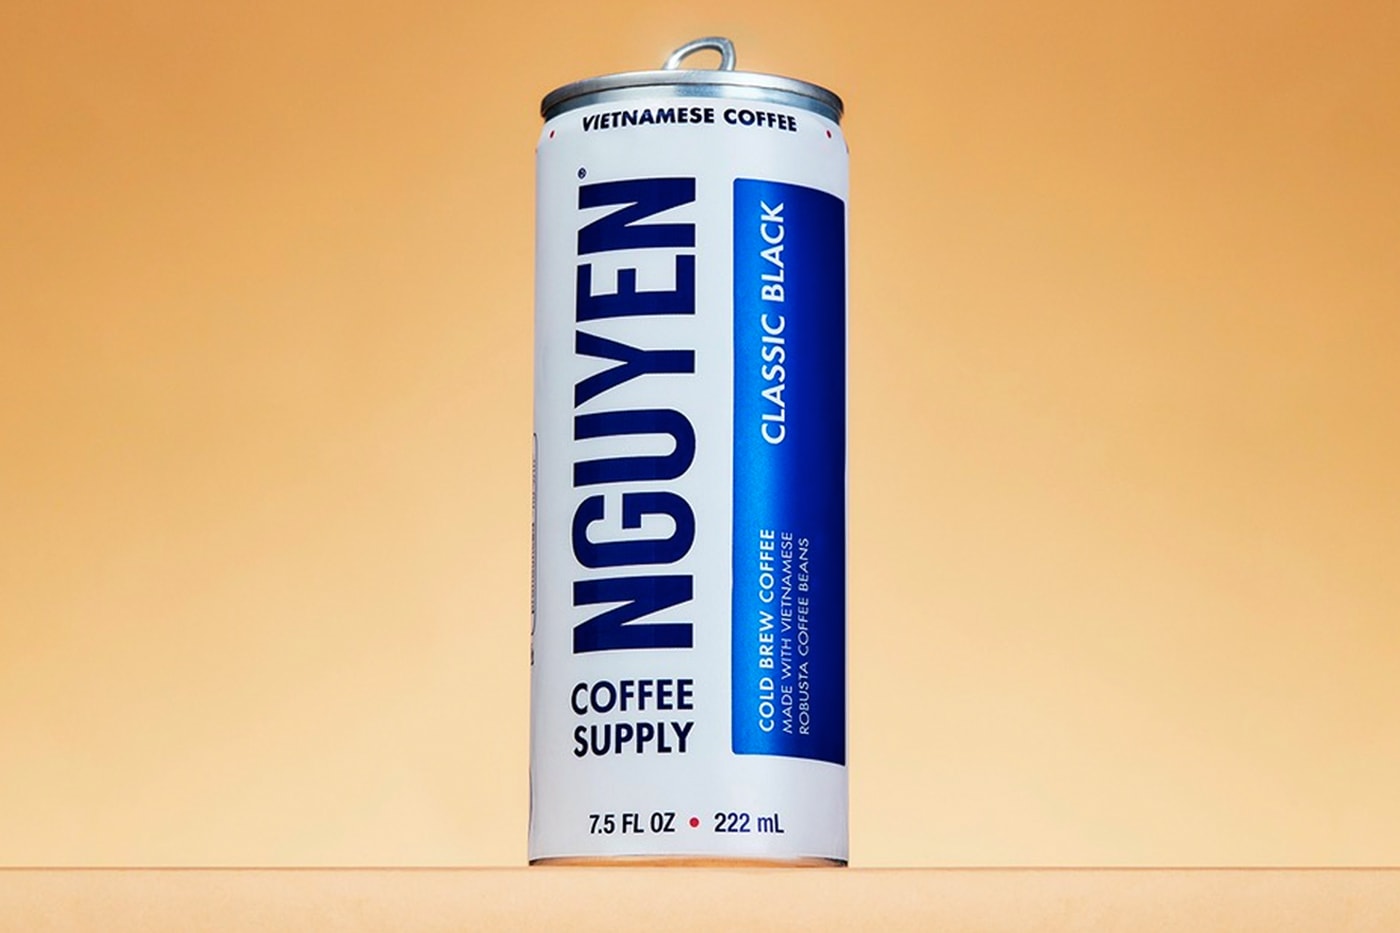 https://image-cdn.hypb.st/https%3A%2F%2Fhypebeast.com%2Fimage%2F2022%2F08%2Fnguyen-coffee-ready-to-drink-canned-vietnamese-coffee-cold-brew-release-info-001.jpg?cbr=1&q=90